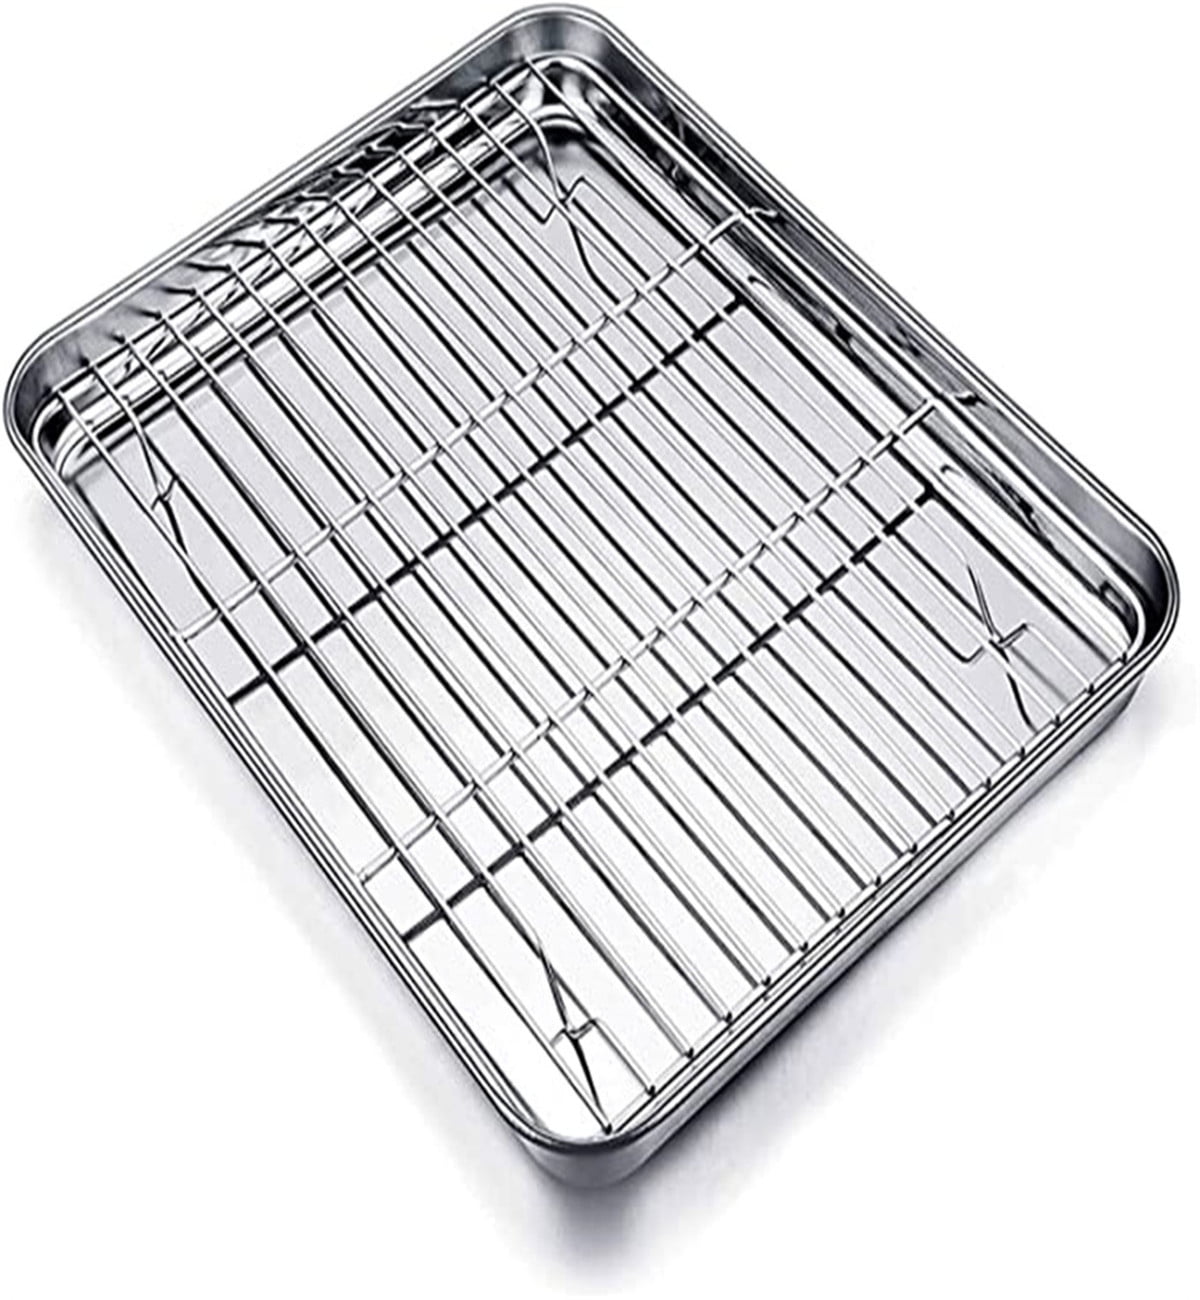 Stainless Steel Baking Pan Tray With Wire Rack Cake Baking BBQ Pan